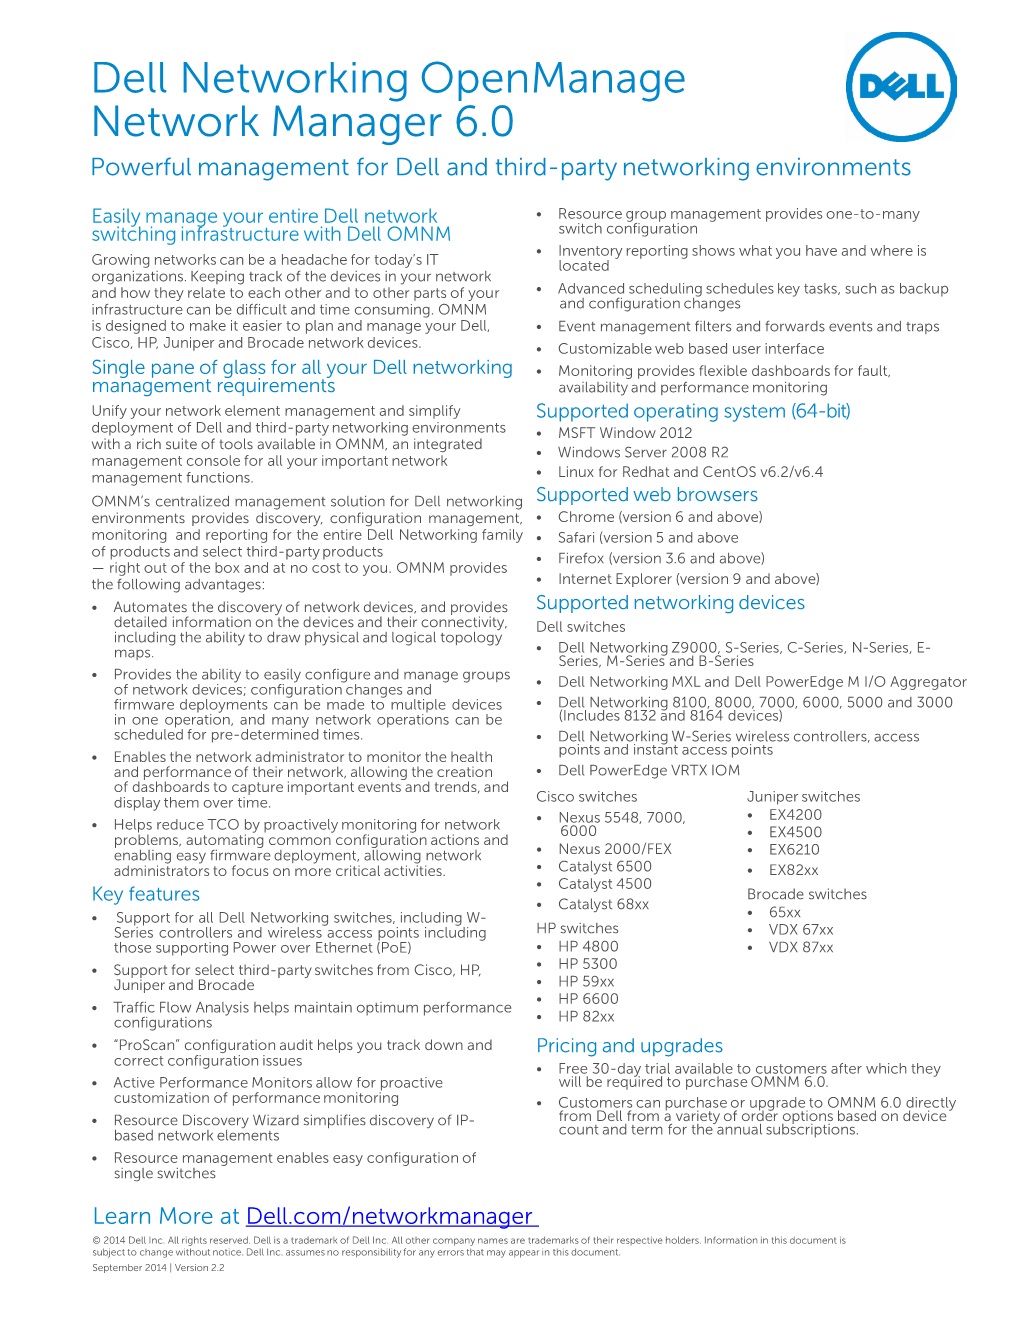 Dell Networking Openmanage Network Manager 6.0 Powerful Management for Dell and Third-Party Networking Environments